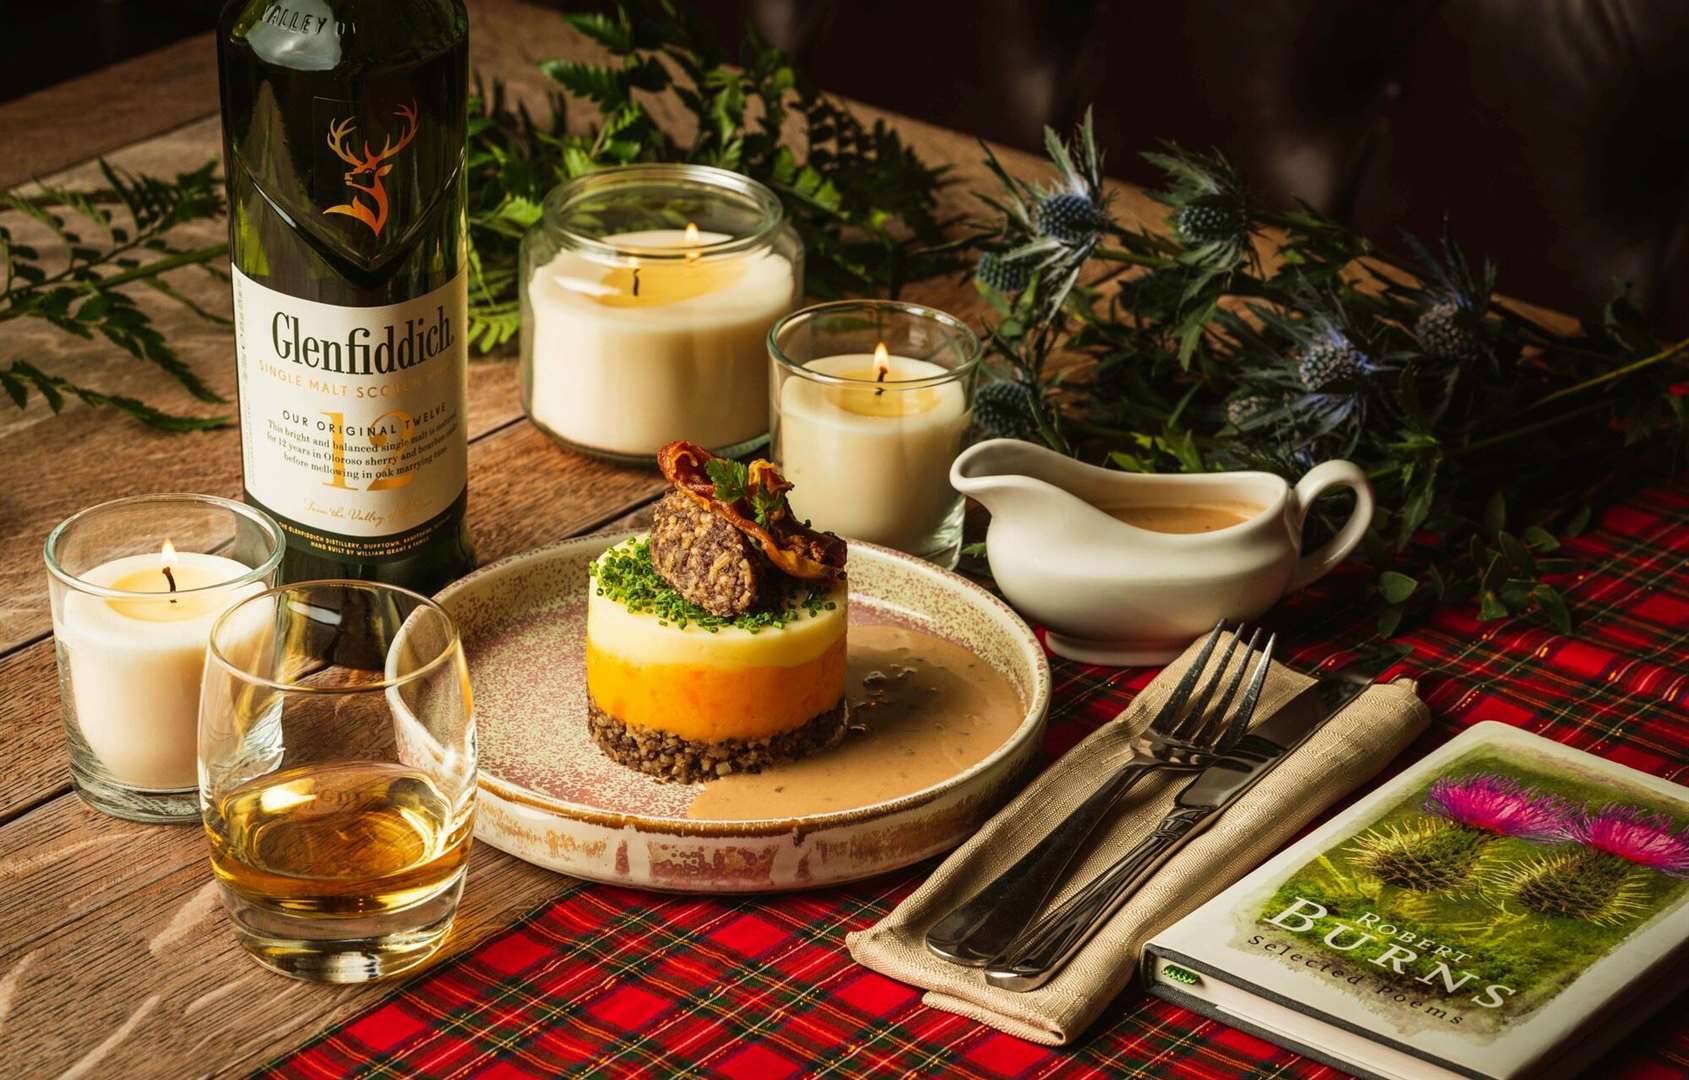 Tuck into a plate of haggis, neeps and tatties this Burns Night. Picture: Shepherd Neame